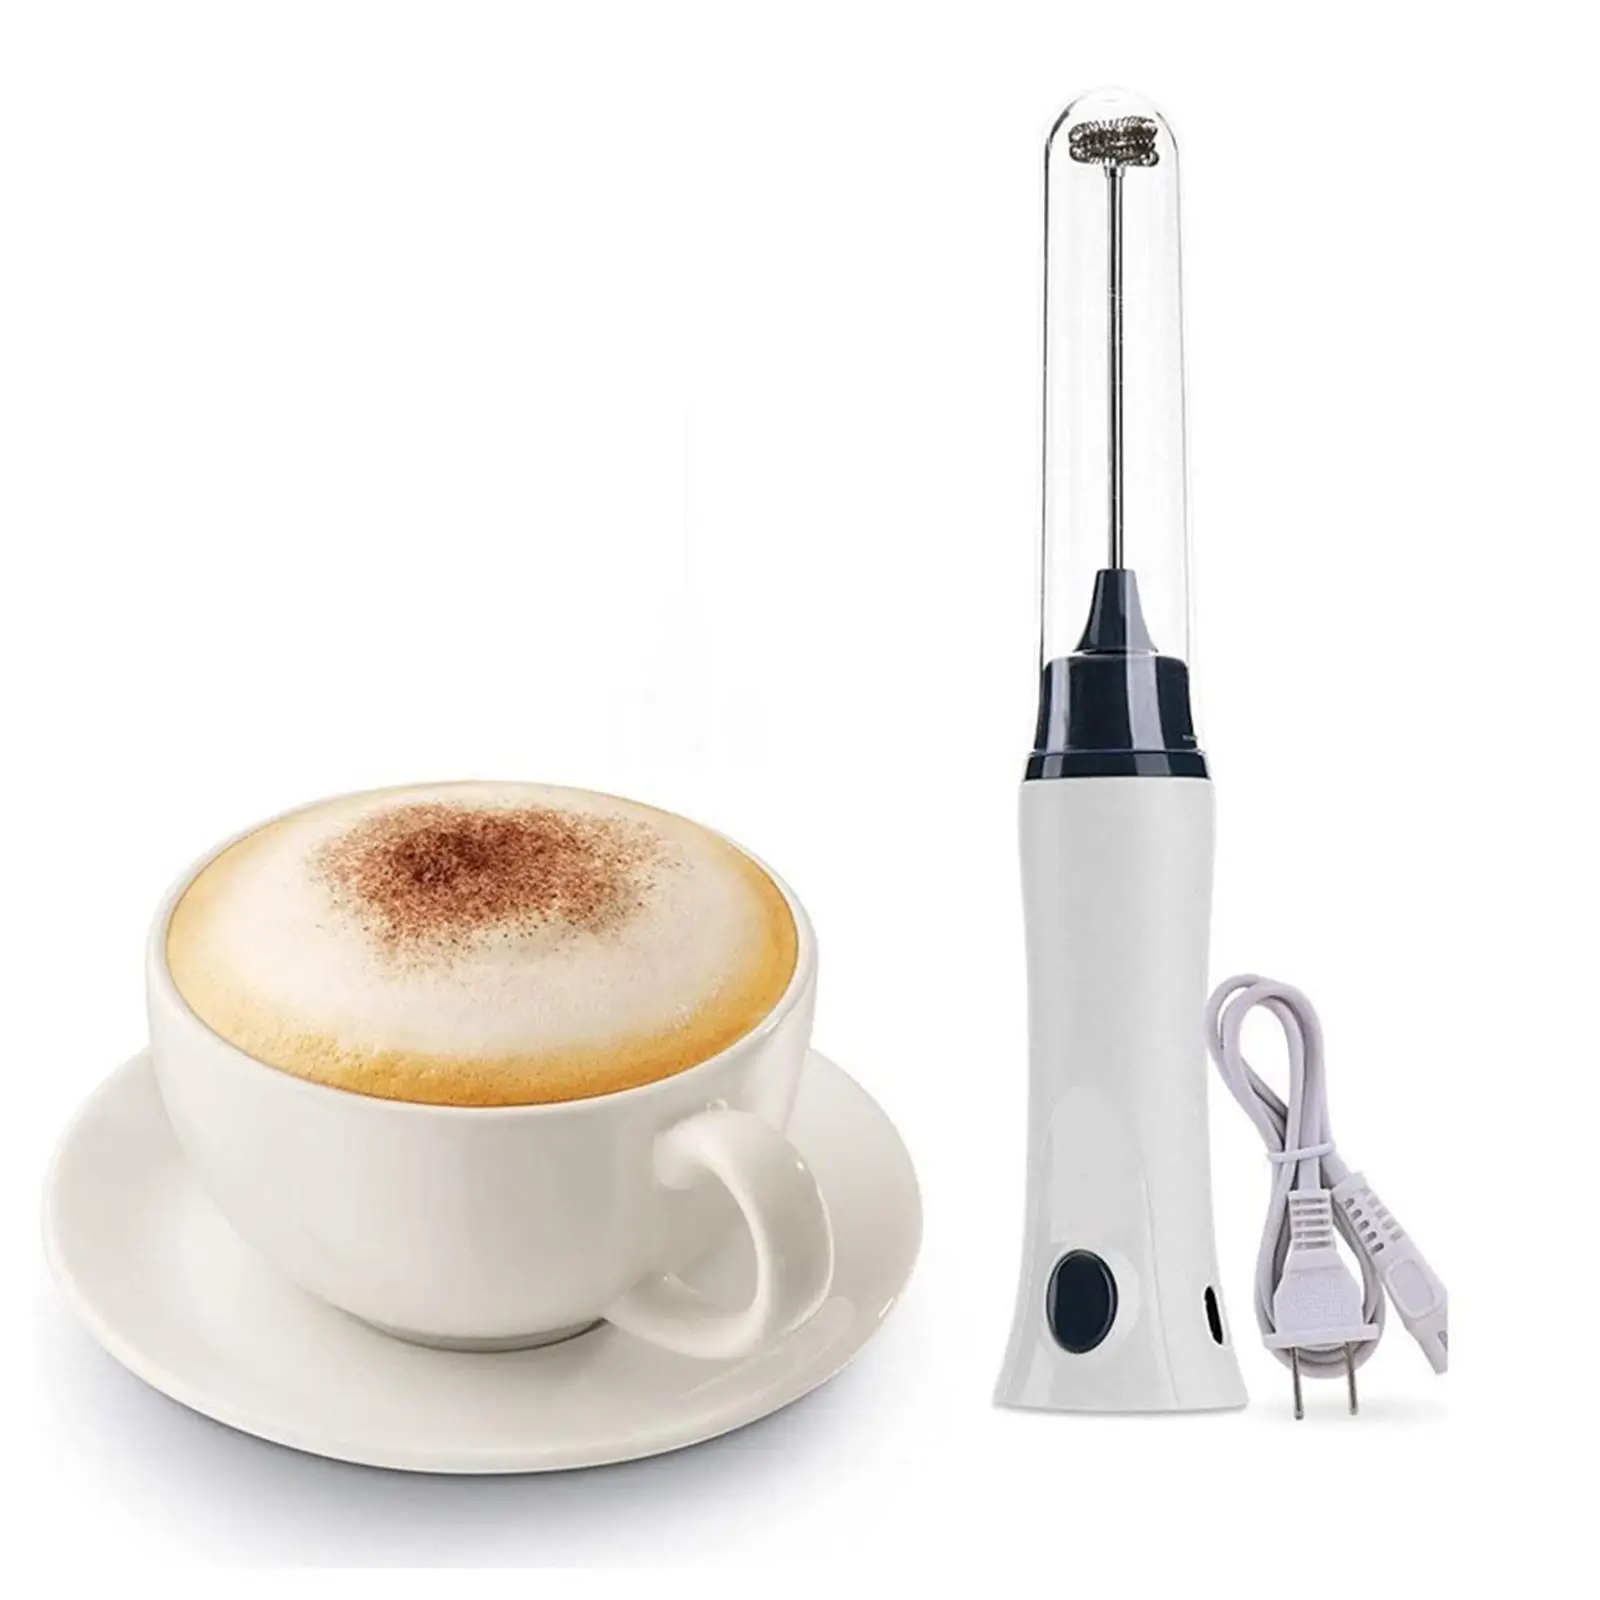 Milk Frother Whisk Foam Maker with Lid for Hot Chocolate Egg Mix Cappuccino